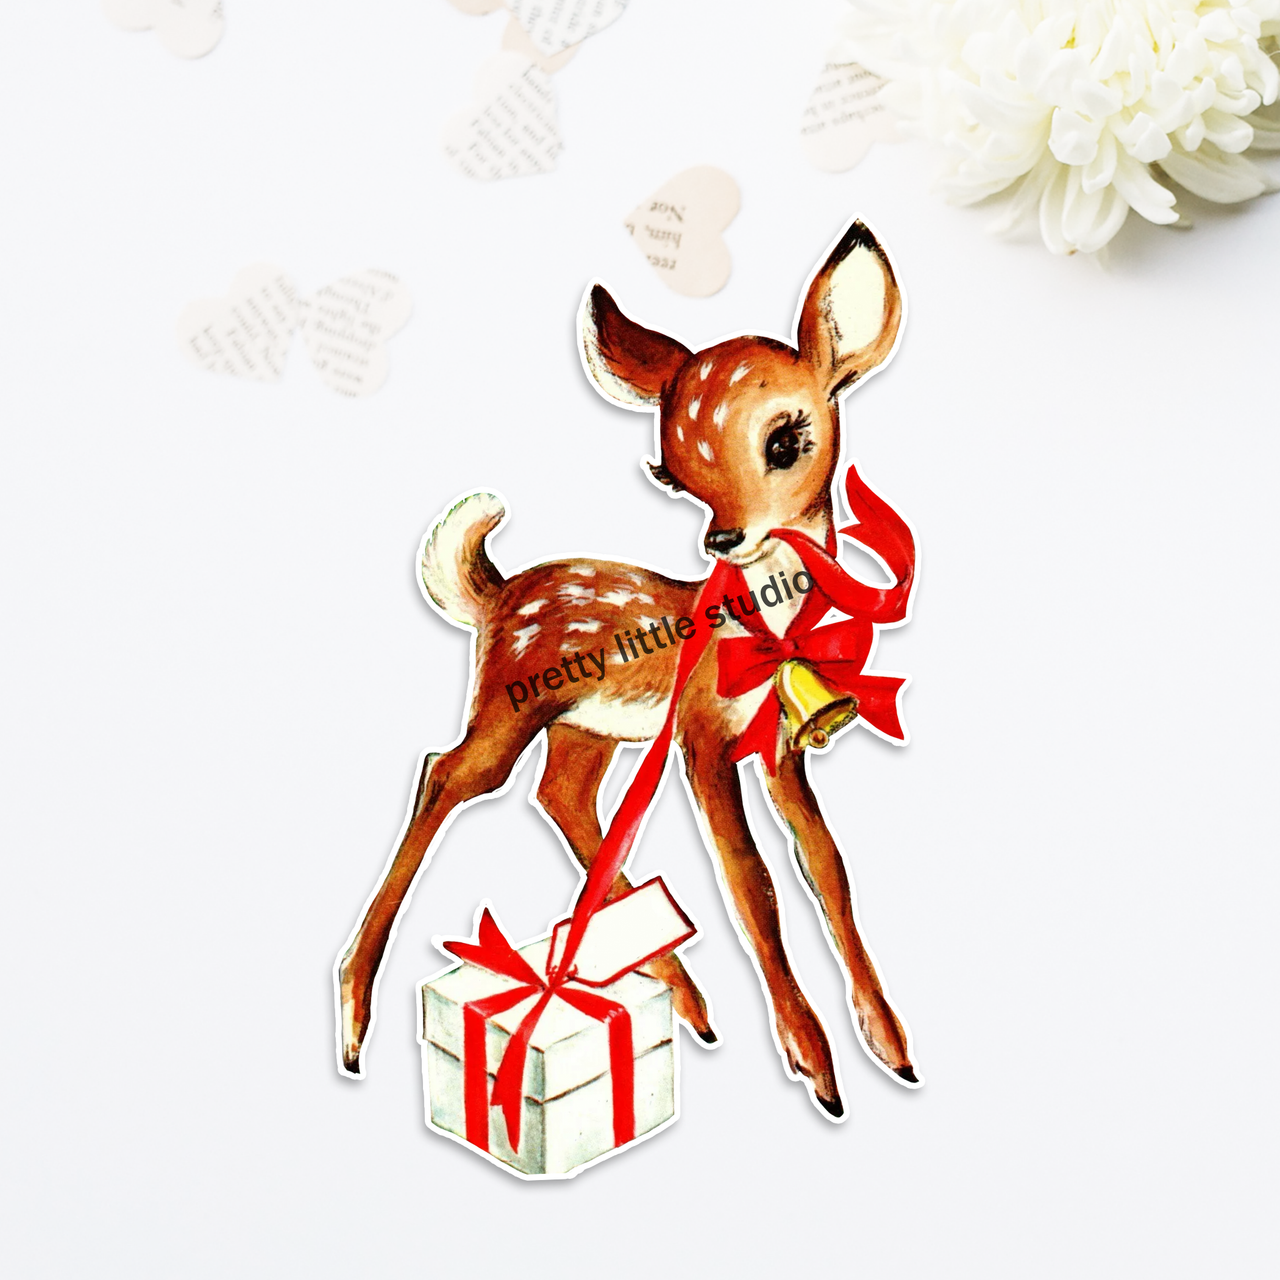 Set of 9 Vintage Retro 1950's Christmas Deer STICKERS - Just Cut & Use!